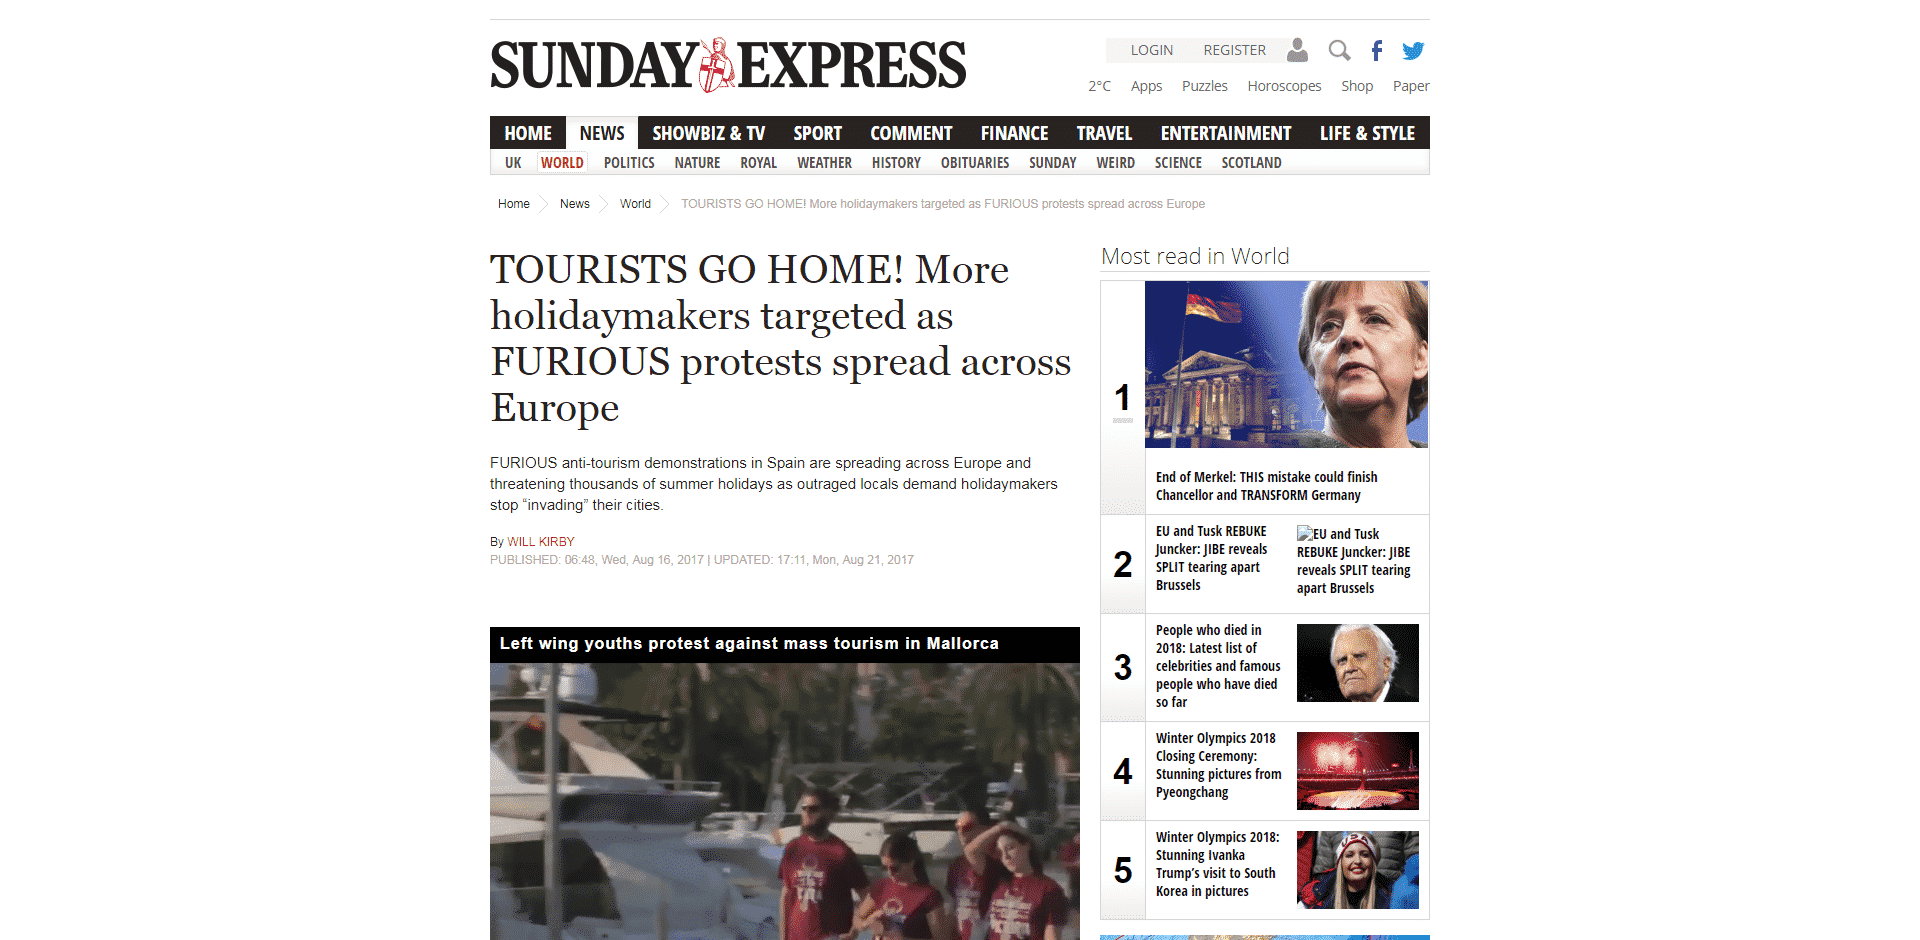 Sunday Express quotes Venezia Autentica in an article regards to the spreading of protests across Europe from local associations against mass tourism - Venezia Autentica | Discover and Support the Authentic Venice -